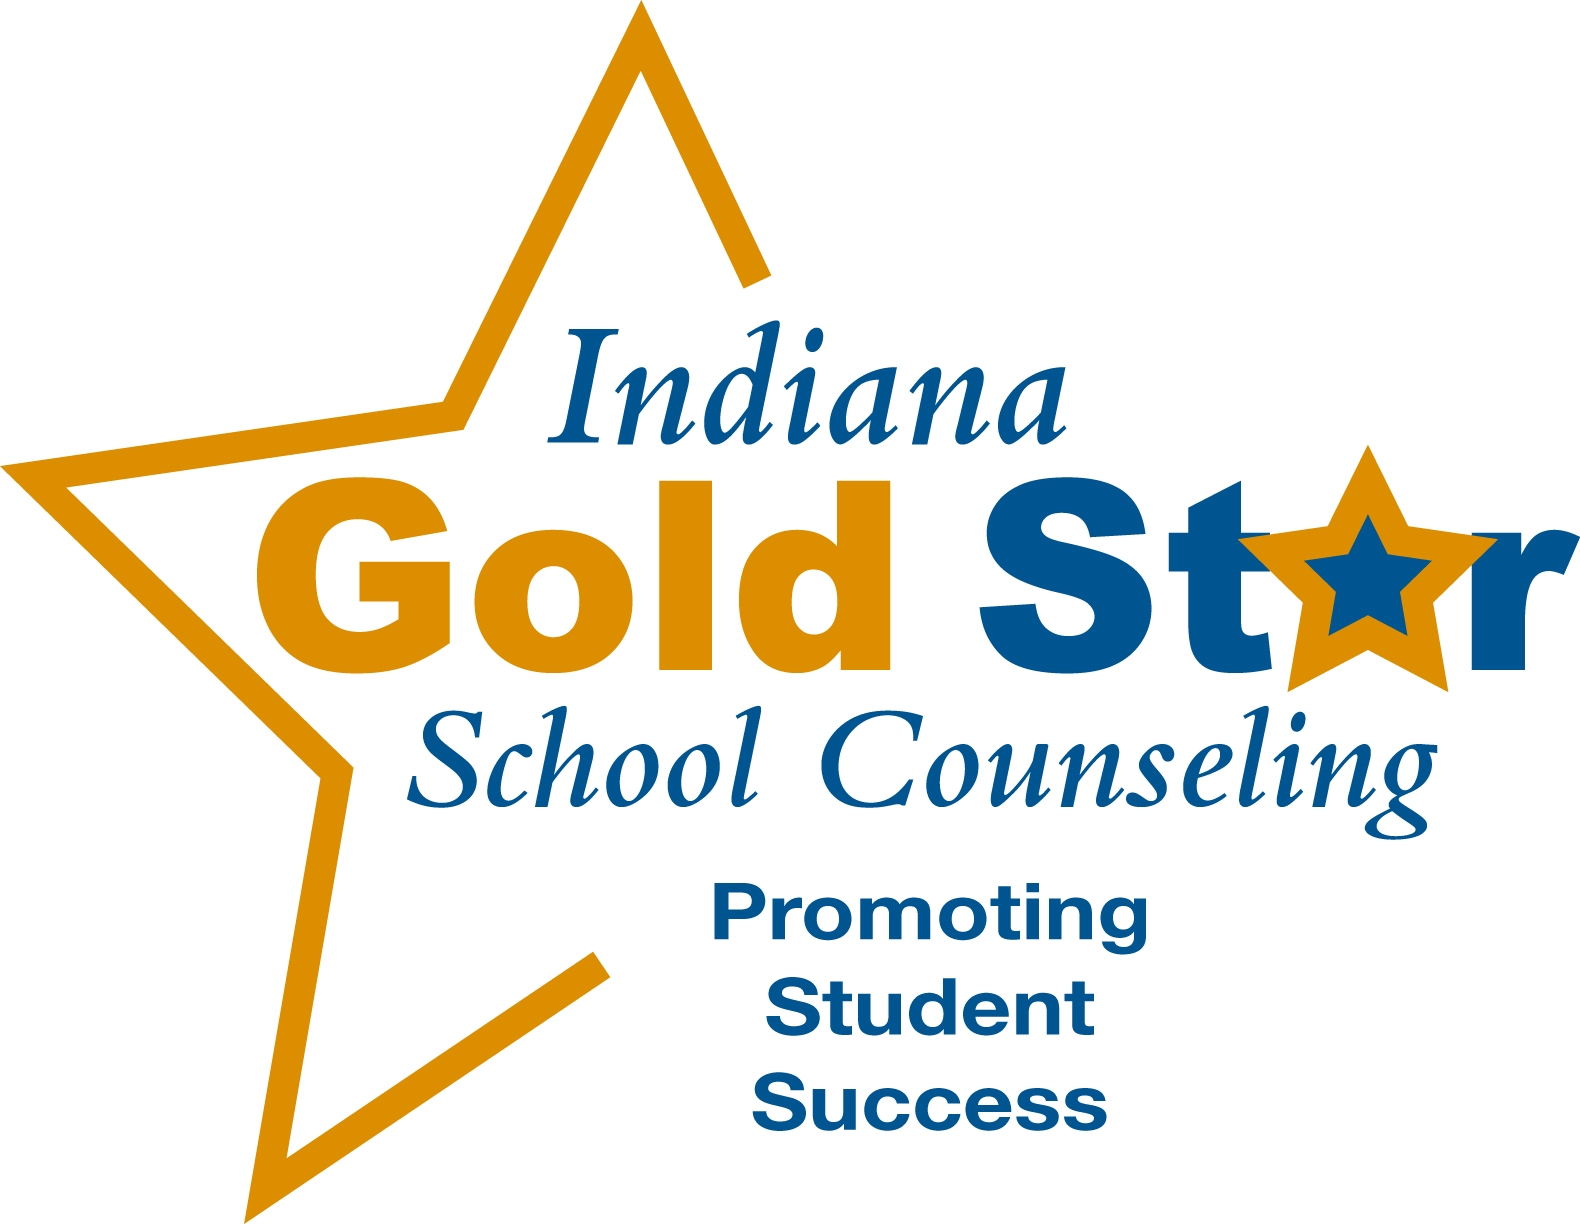 Indiana Gold Star School Counseling logo